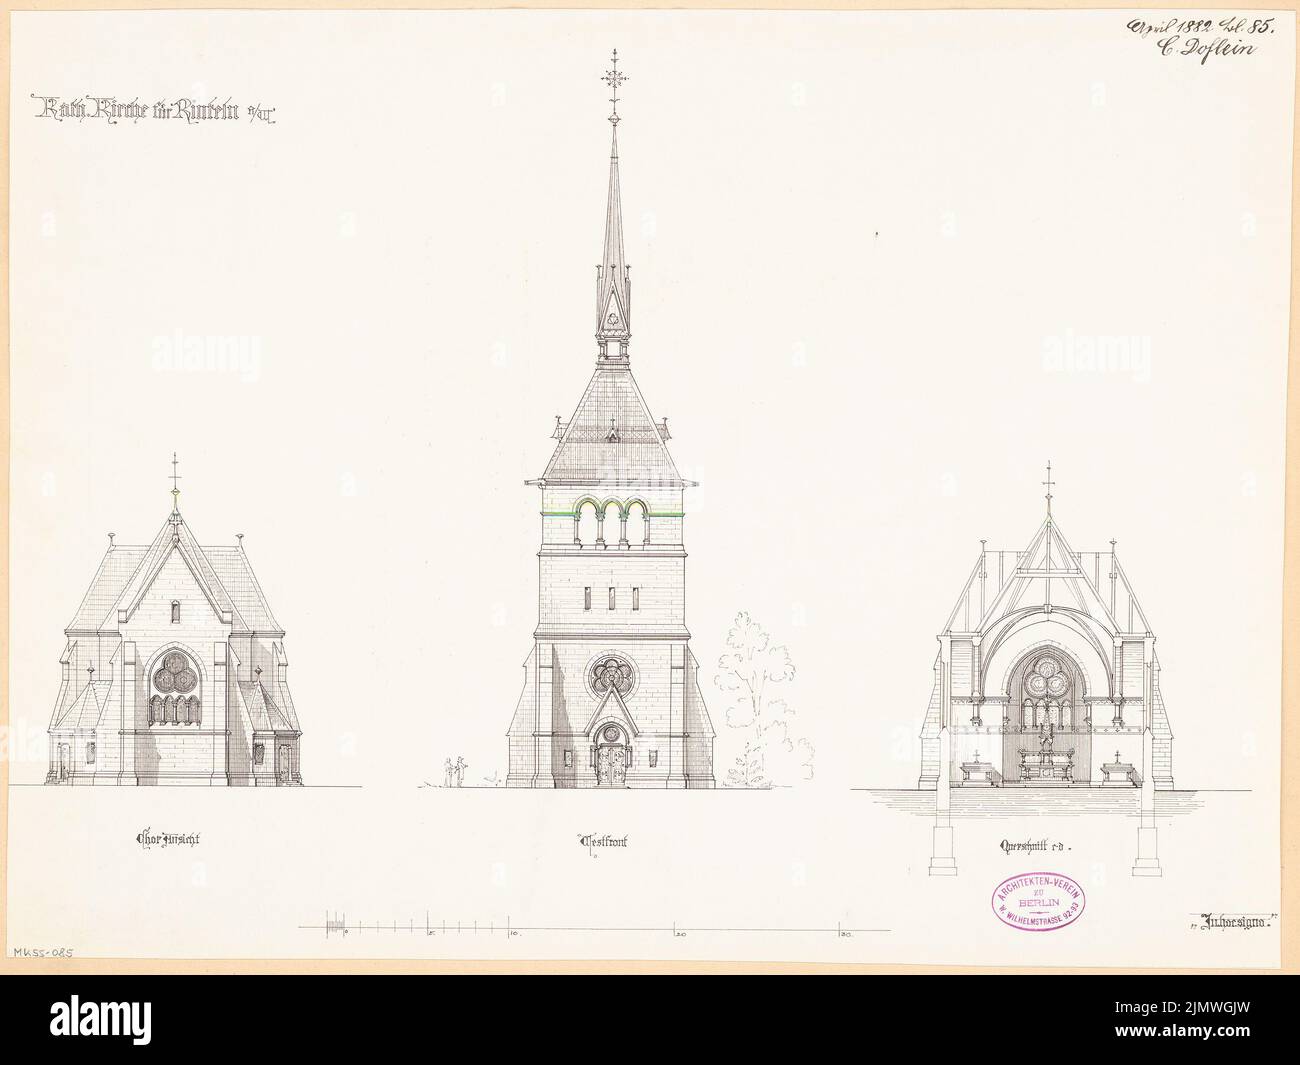 Doflein Karl (1856-1943), Catholic Church of St. Sturmius in Rinteln. Monthly competition April 1882 (04.1882): Upper West view (tower view), choir view, cross -section towards altar (with pulpit and secondary altar); Scale bar. Ink on paper, 39.8 x 53 cm (including scan edges) Doflein Karl  (1856-1943): Katholische Kirche St. Sturmius, Rinteln. Monatskonkurrenz April 1882 Stock Photo